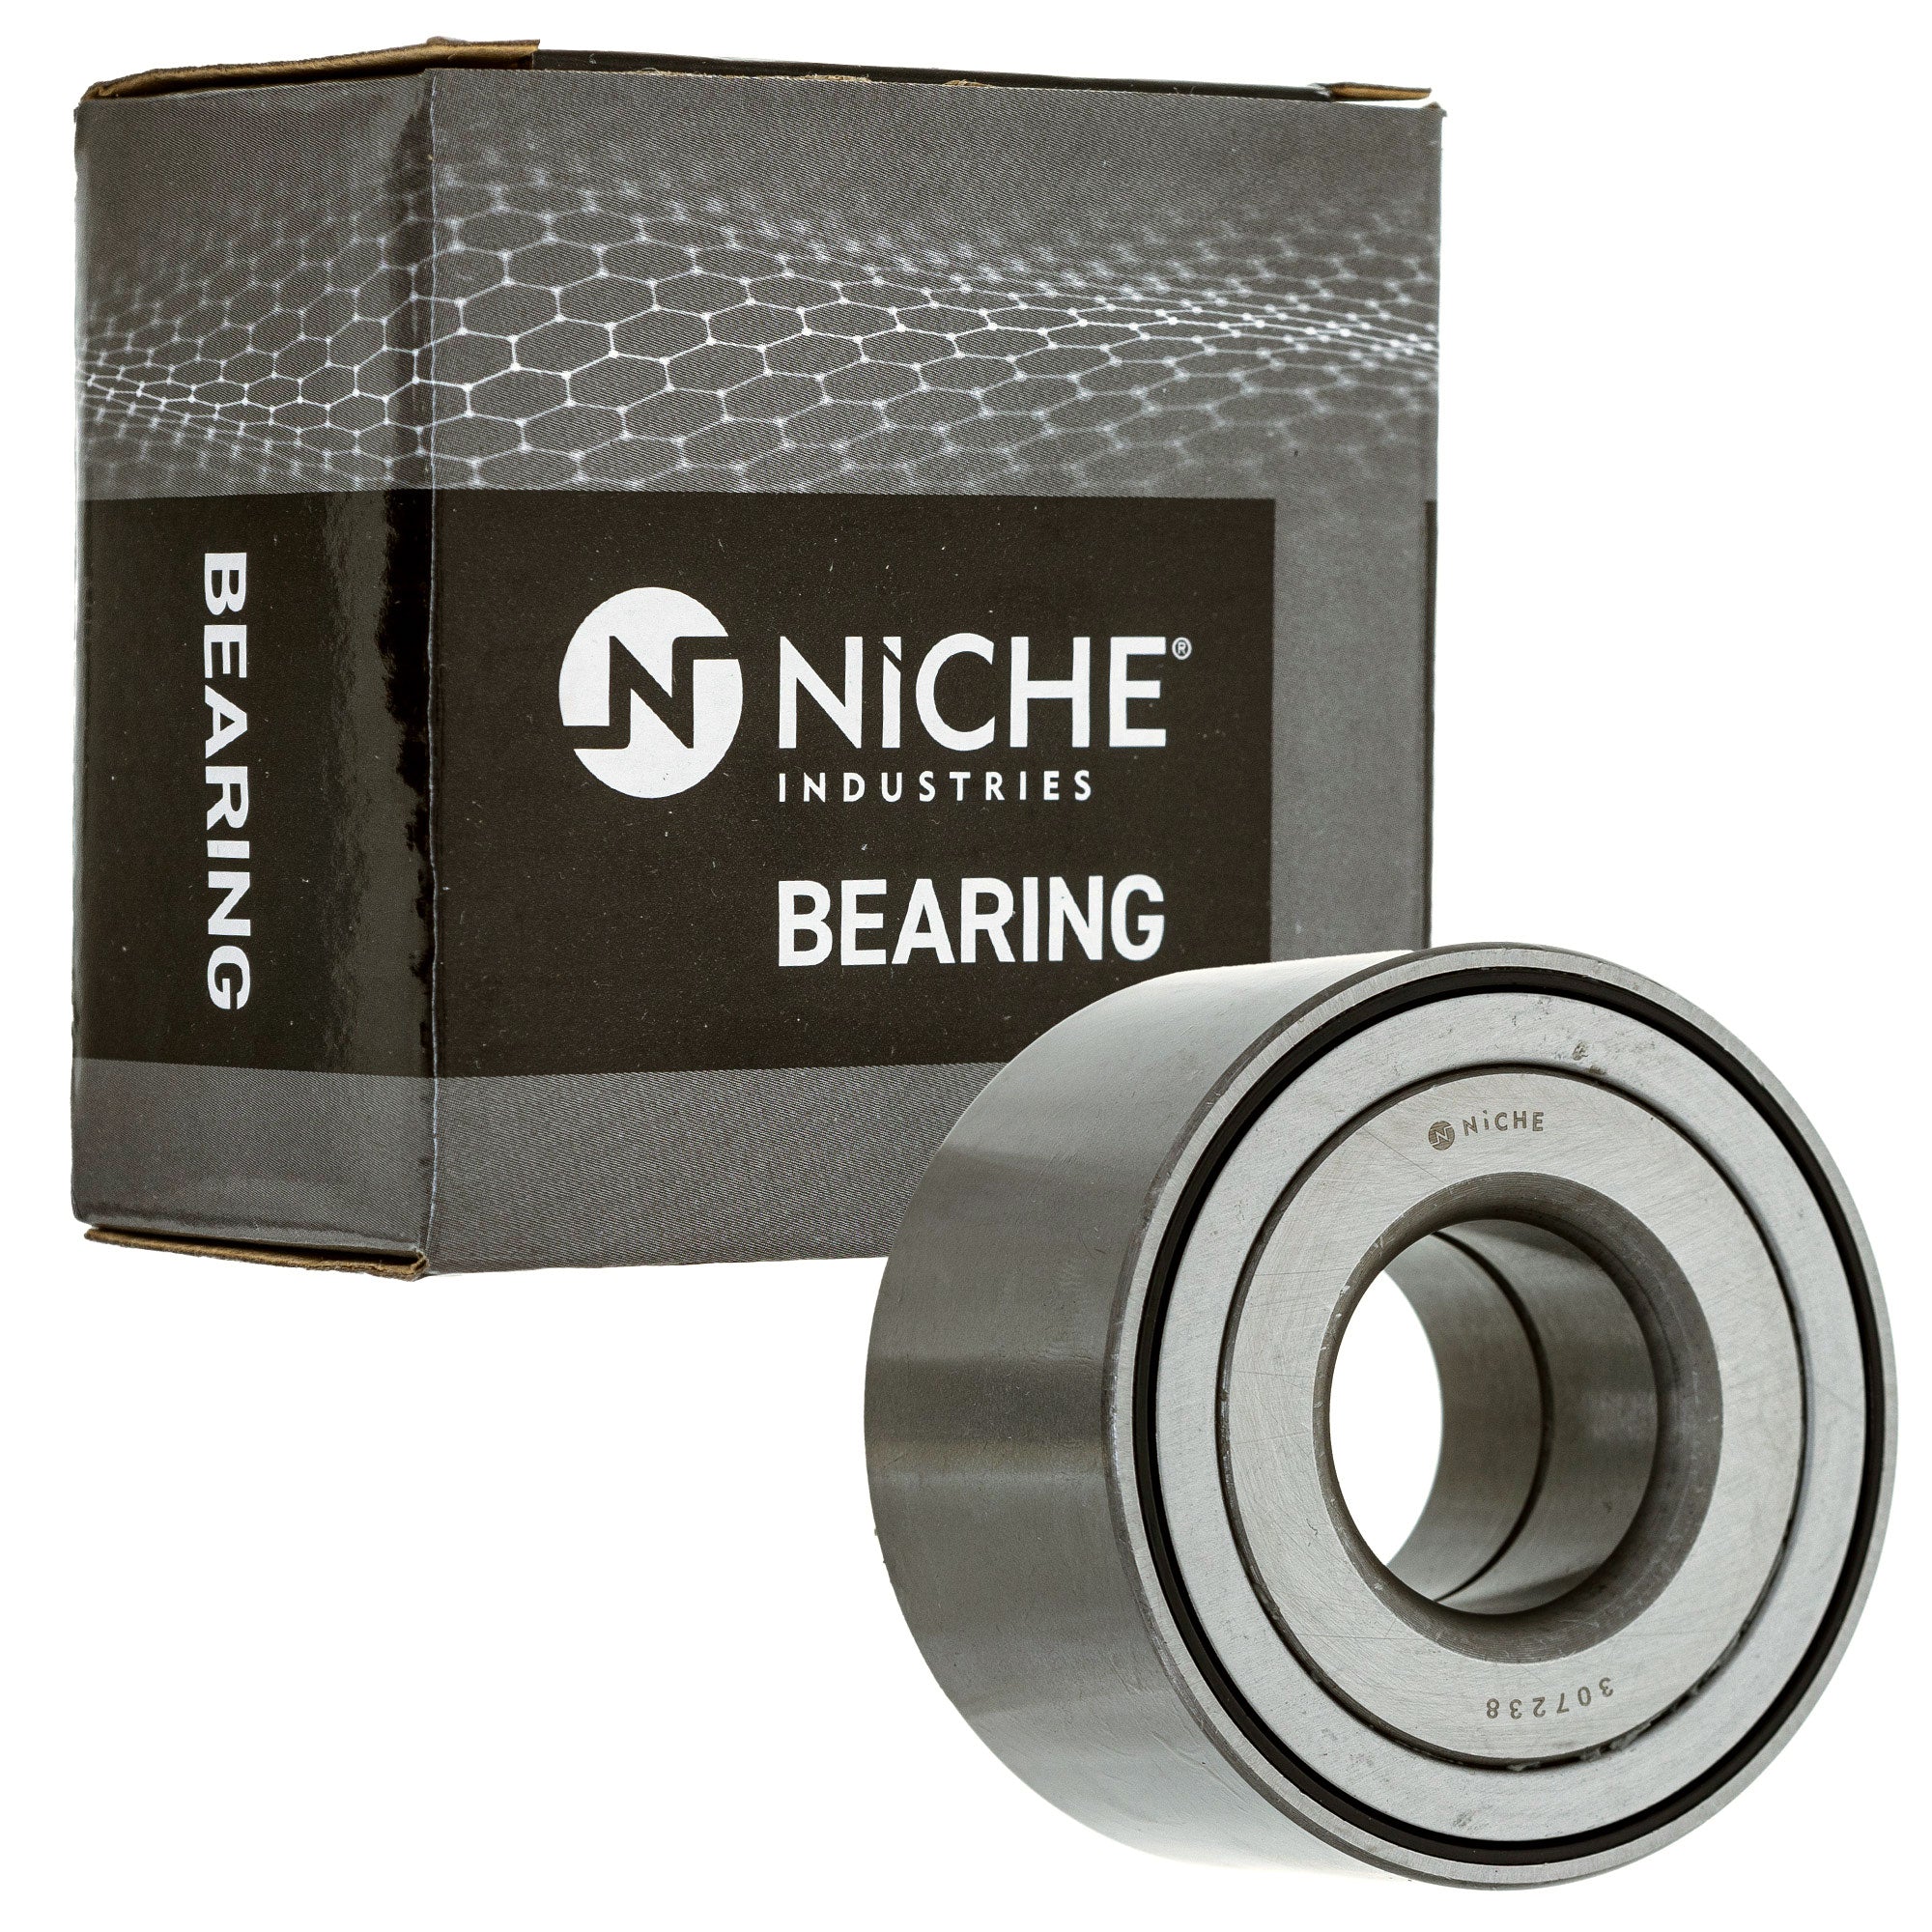 NICHE 519-CBB2219R Bearing 2-Pack for zOTHER YXZ1000R